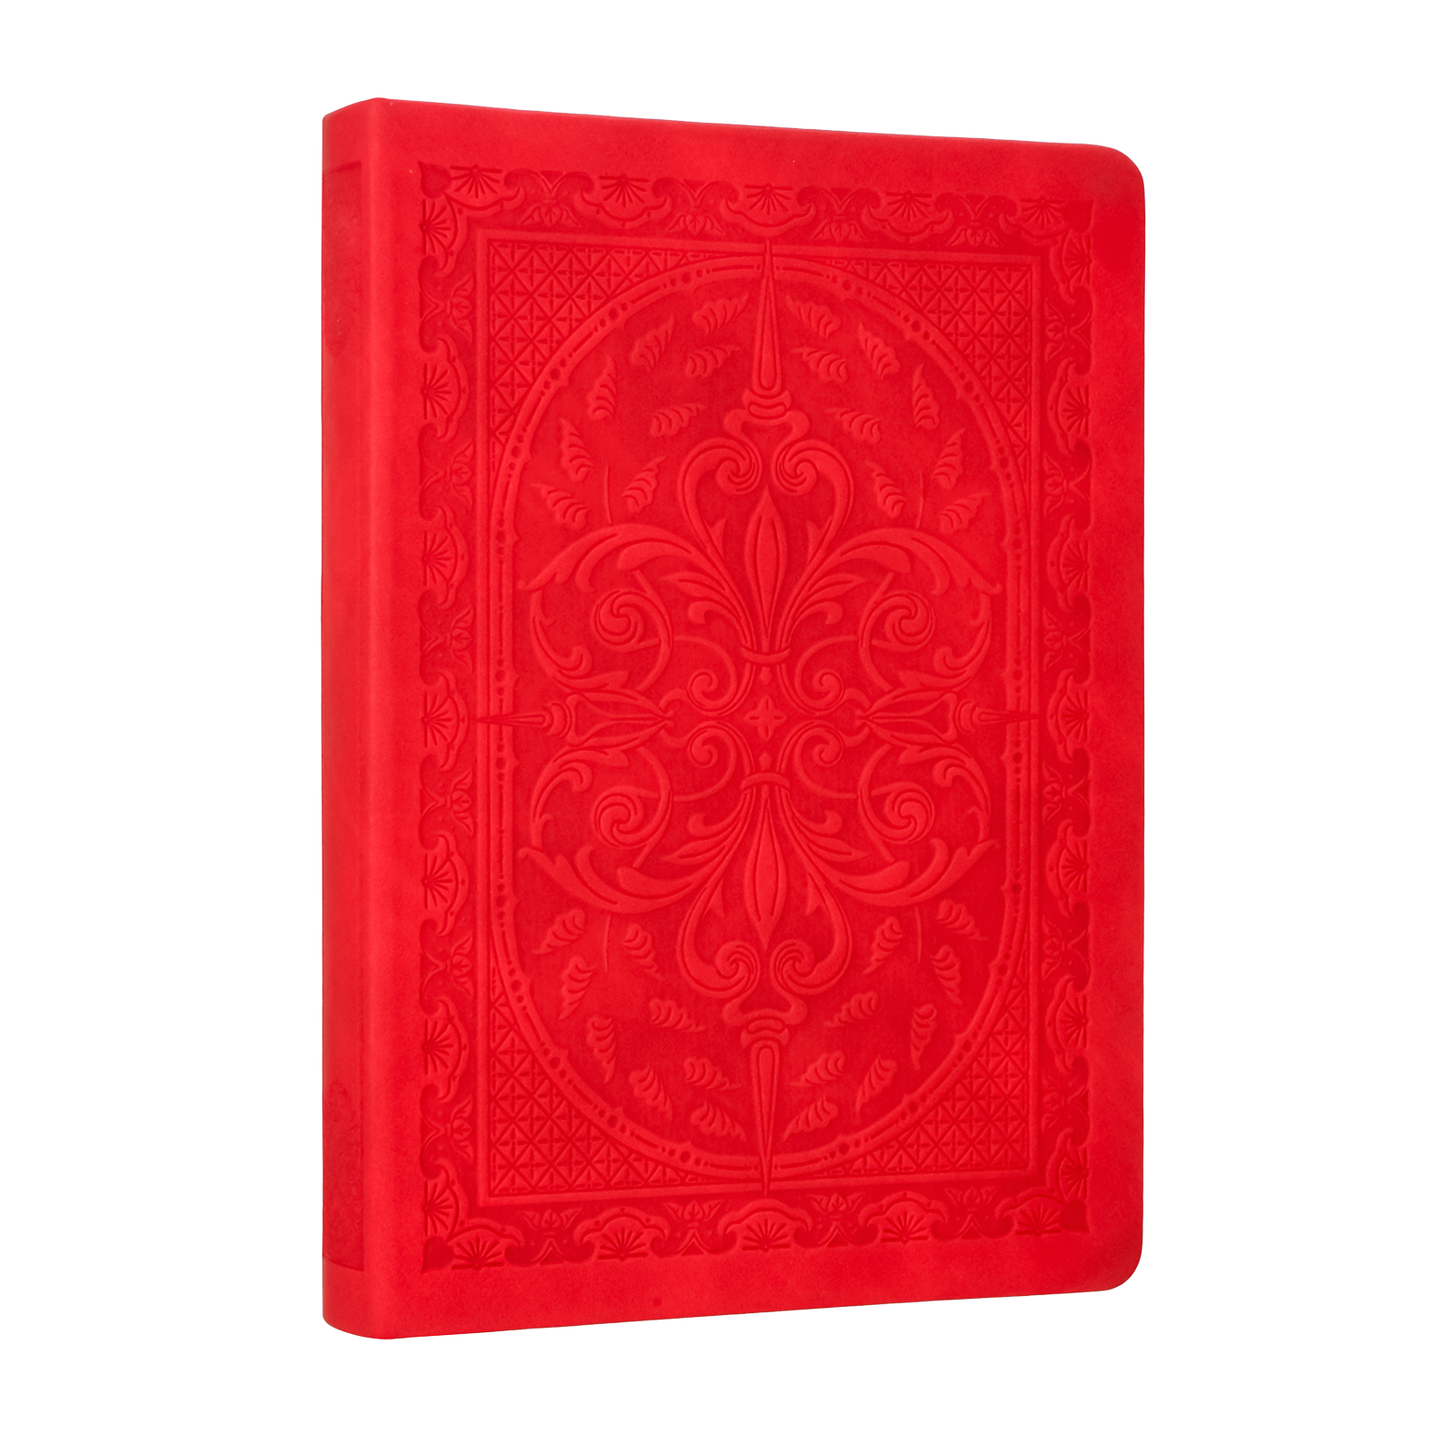 Victoria's Journals Vintage Style Diary for Men and Women – Use it for Writing, Note Taking, Poetry, Travel, Gratitude, Mindfulness, Self-Help, Daily Affirmations or a Prayer Journal 320p. (Red)